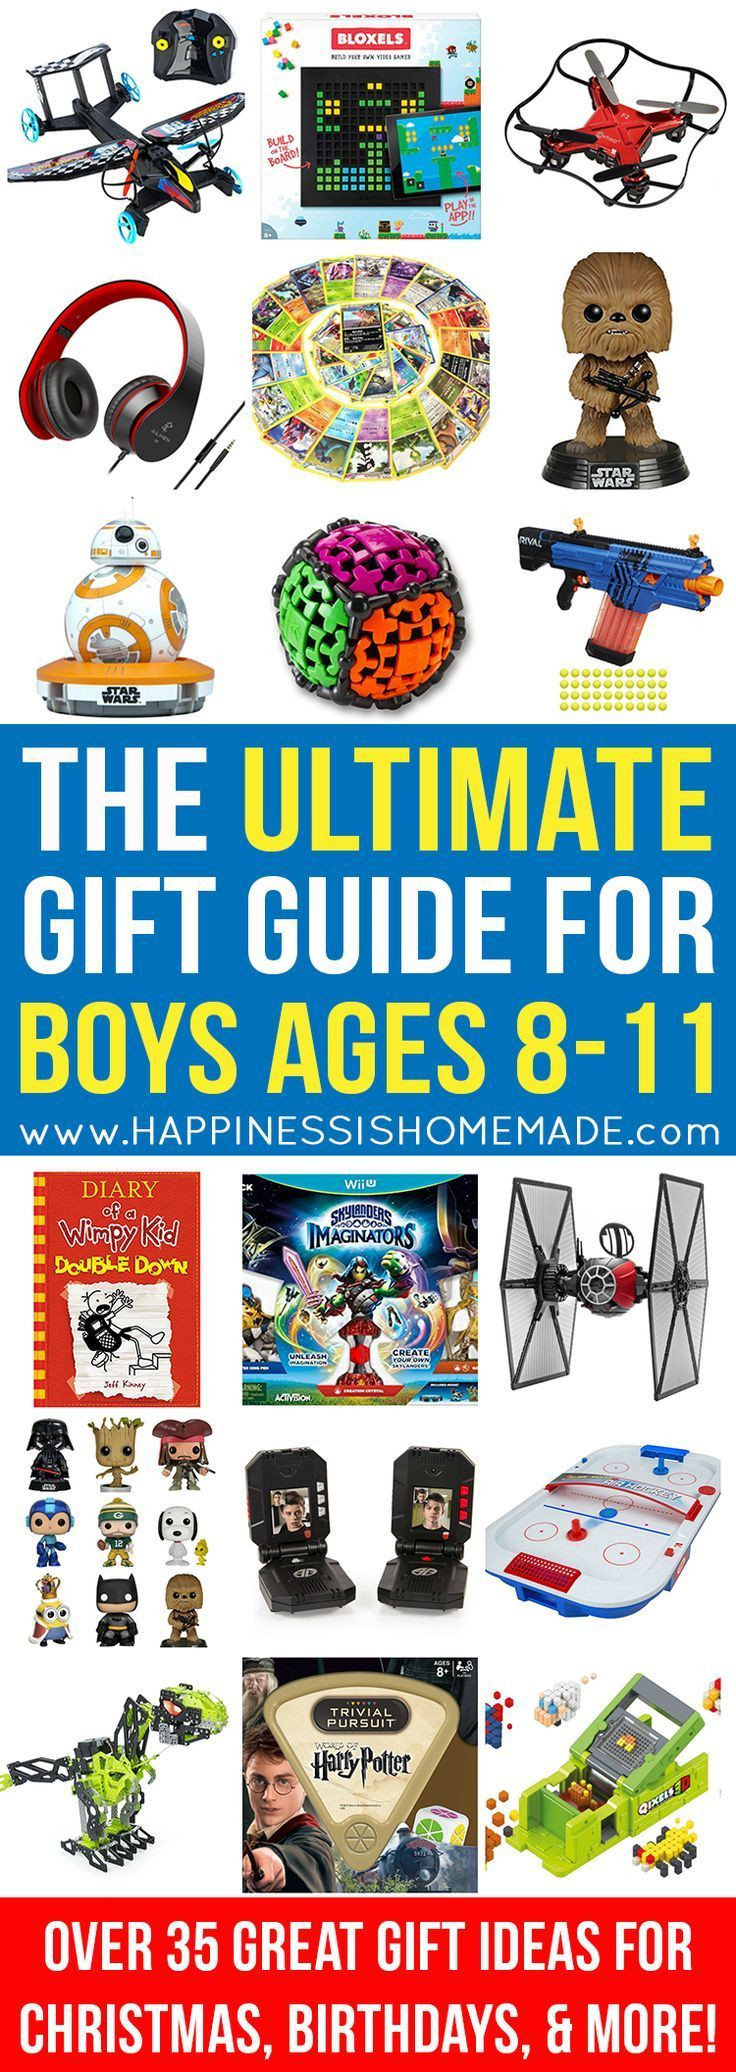 8 Year Old Christmas Gift Ideas
 120 best images about Best Toys for 8 Year Old Girls on